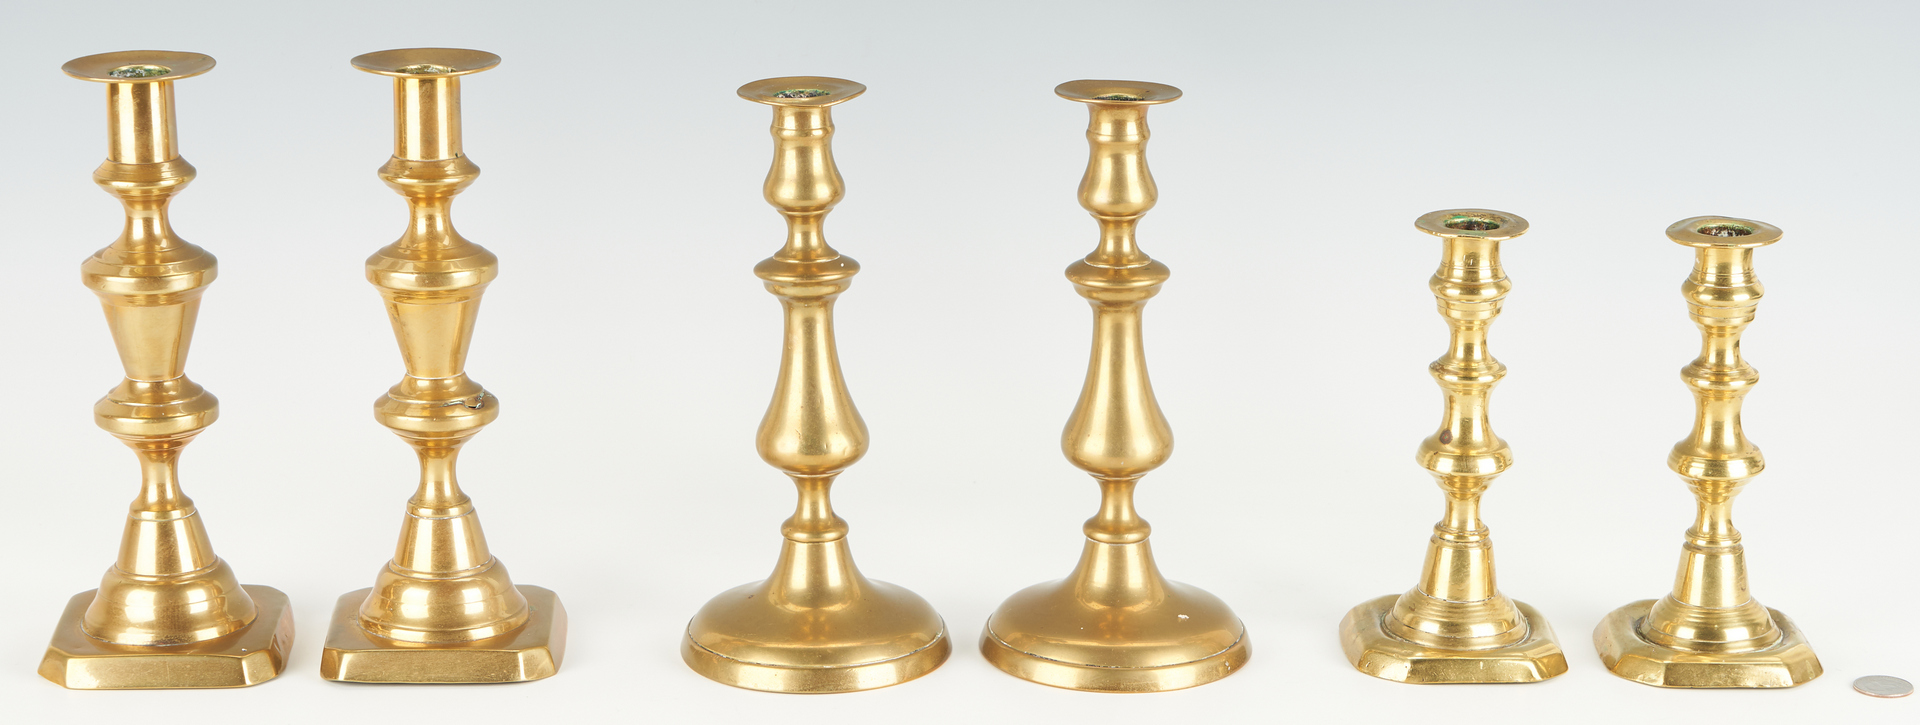 Lot 452: Collection of 10 Antique Brass Candlesticks